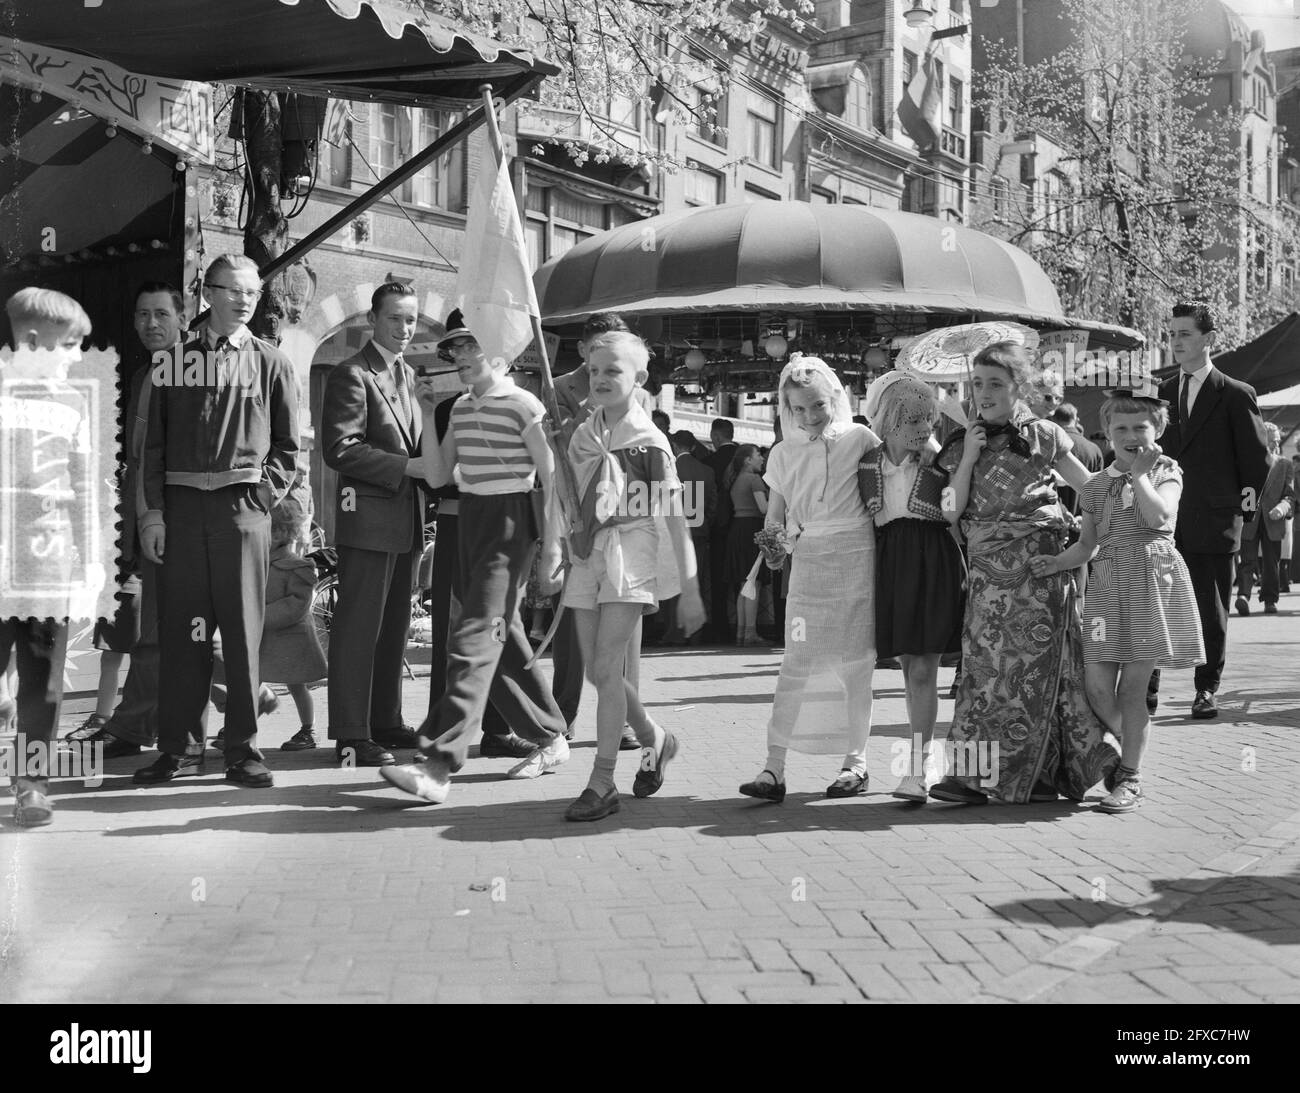 National holiday; fair at the Beursplein in Amsterdam, May 5, 1956, fairgrounds, The Netherlands, 20th century press agency photo, news to remember, documentary, historic photography 1945-1990, visual stories, human history of the Twentieth Century, capturing moments in time Stock Photo